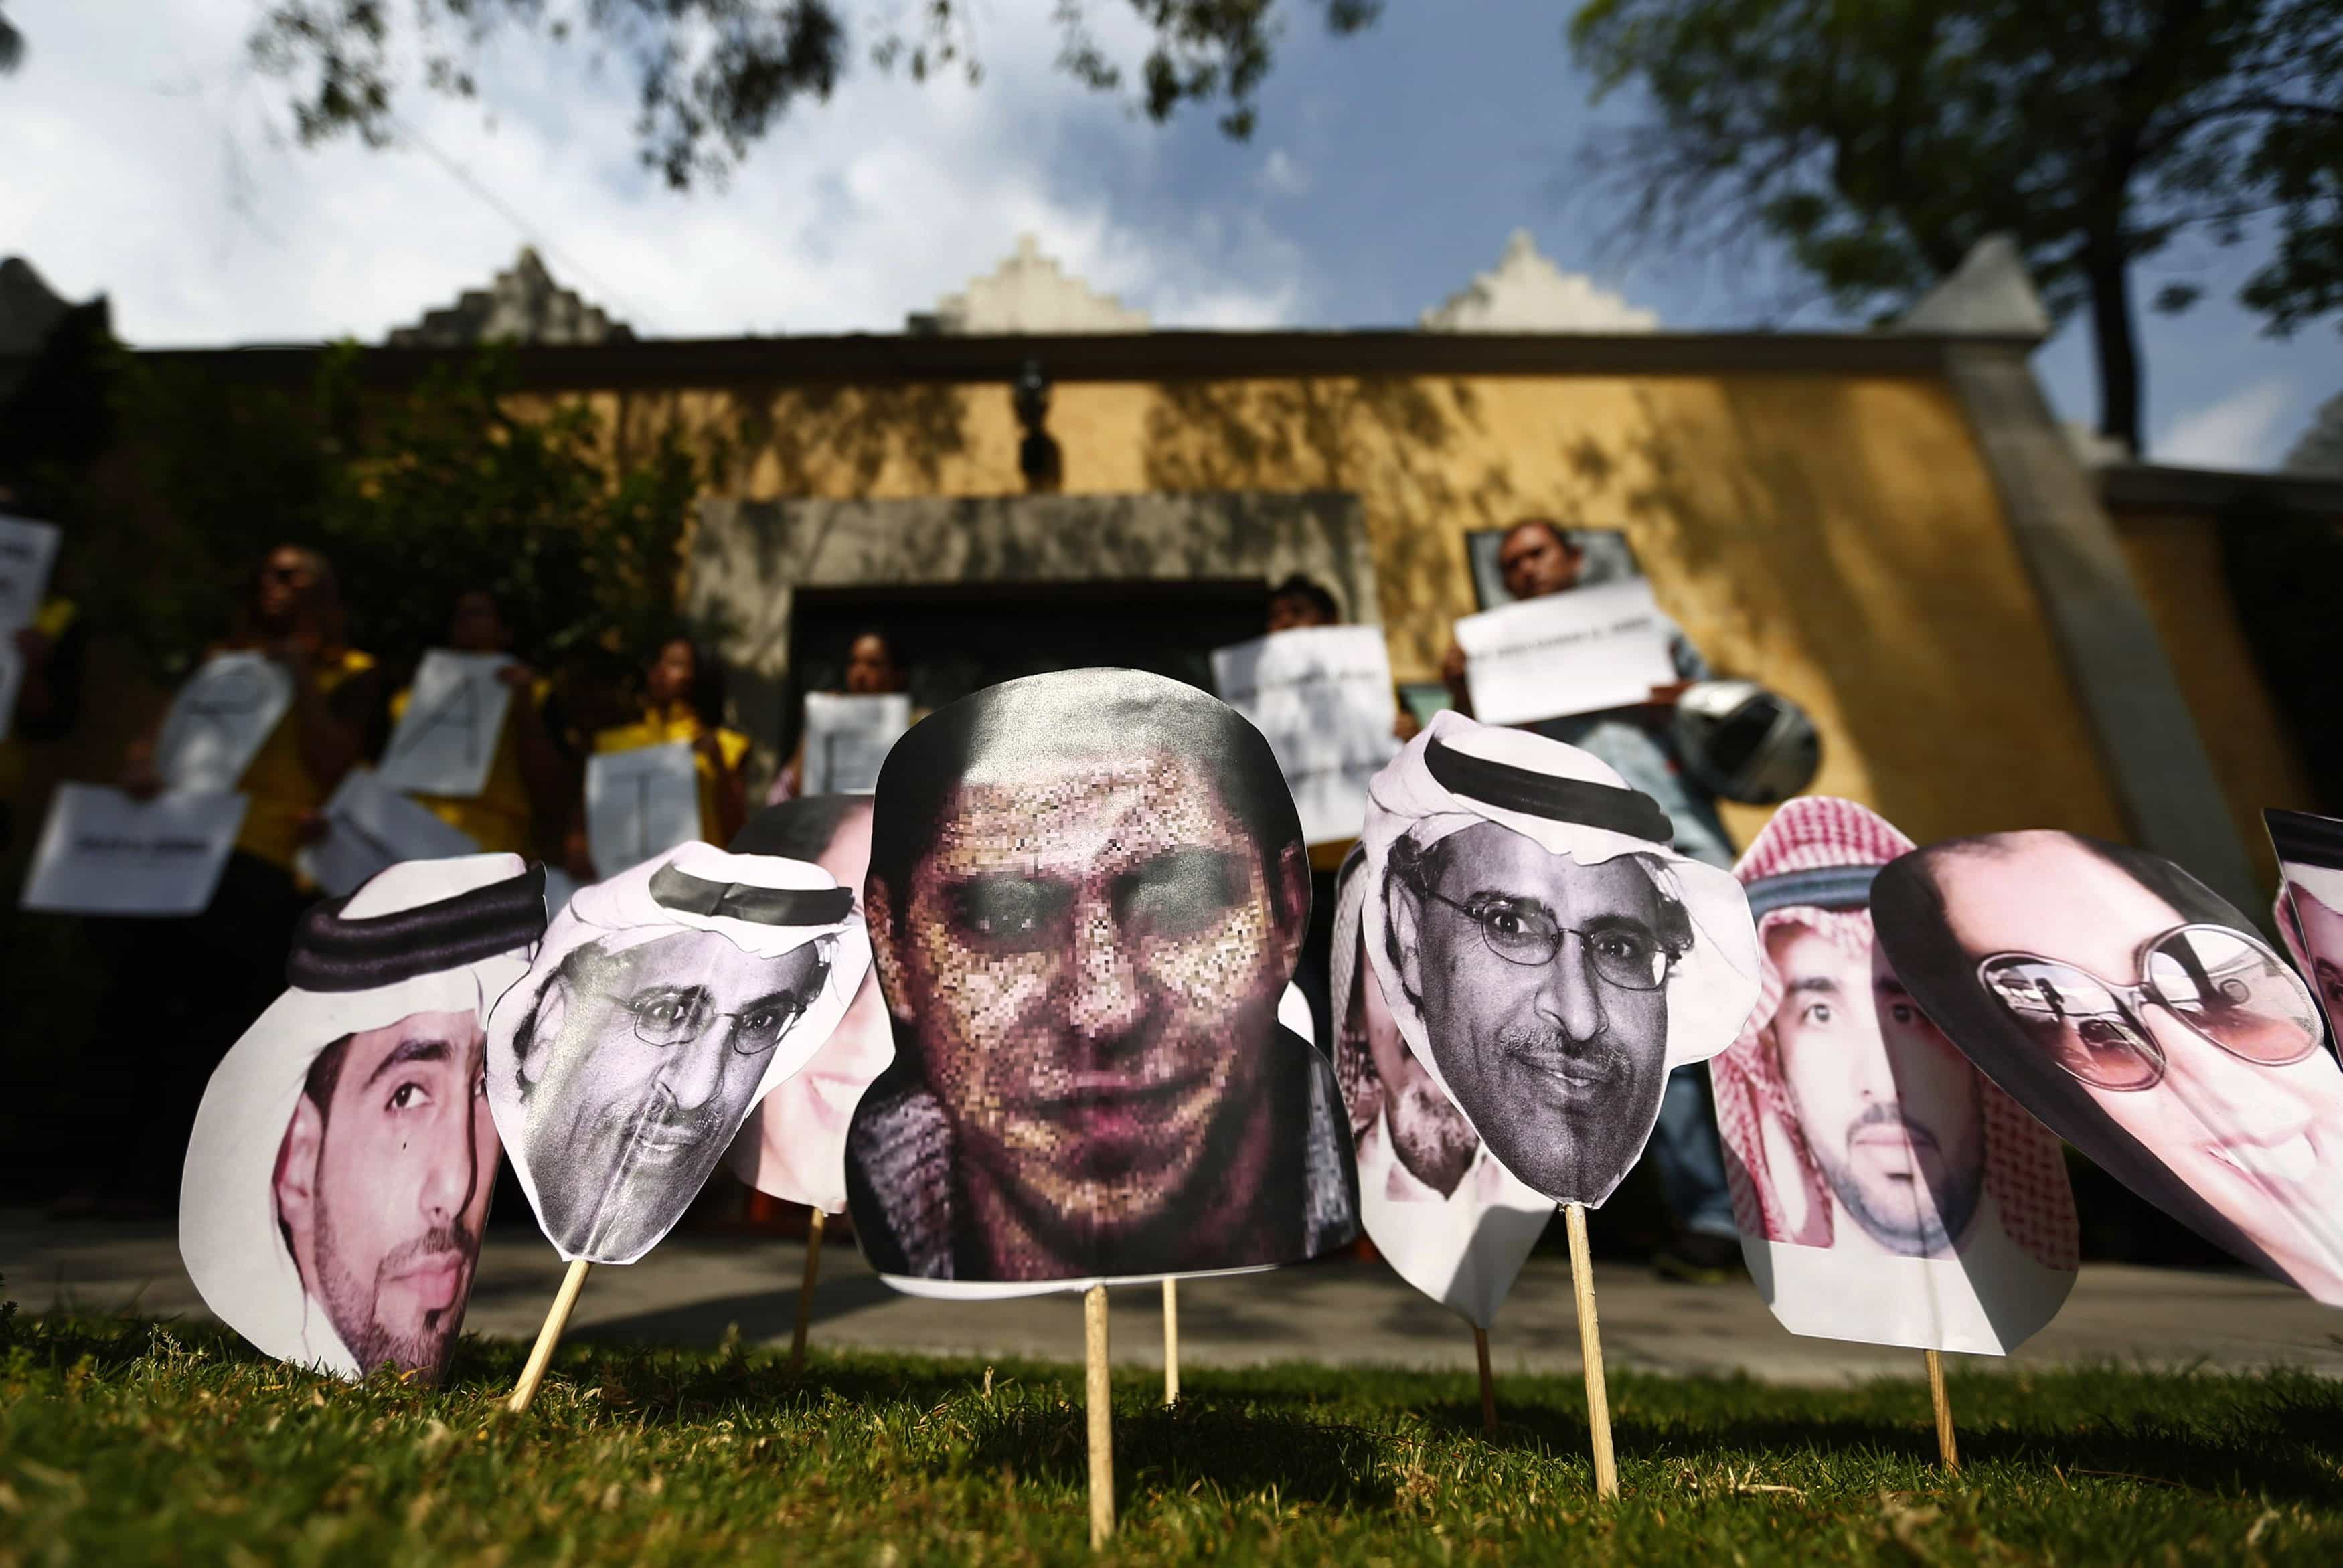 A picture of Saudi blogger Raif Badawi (C) is seen between other photos of prisoners in Saudi Arabia during a demonstration for his release from jail outside the Embassy of Saudi Arabia in Mexico City, 20 February 2015, REUTERS/Edgard Garrido